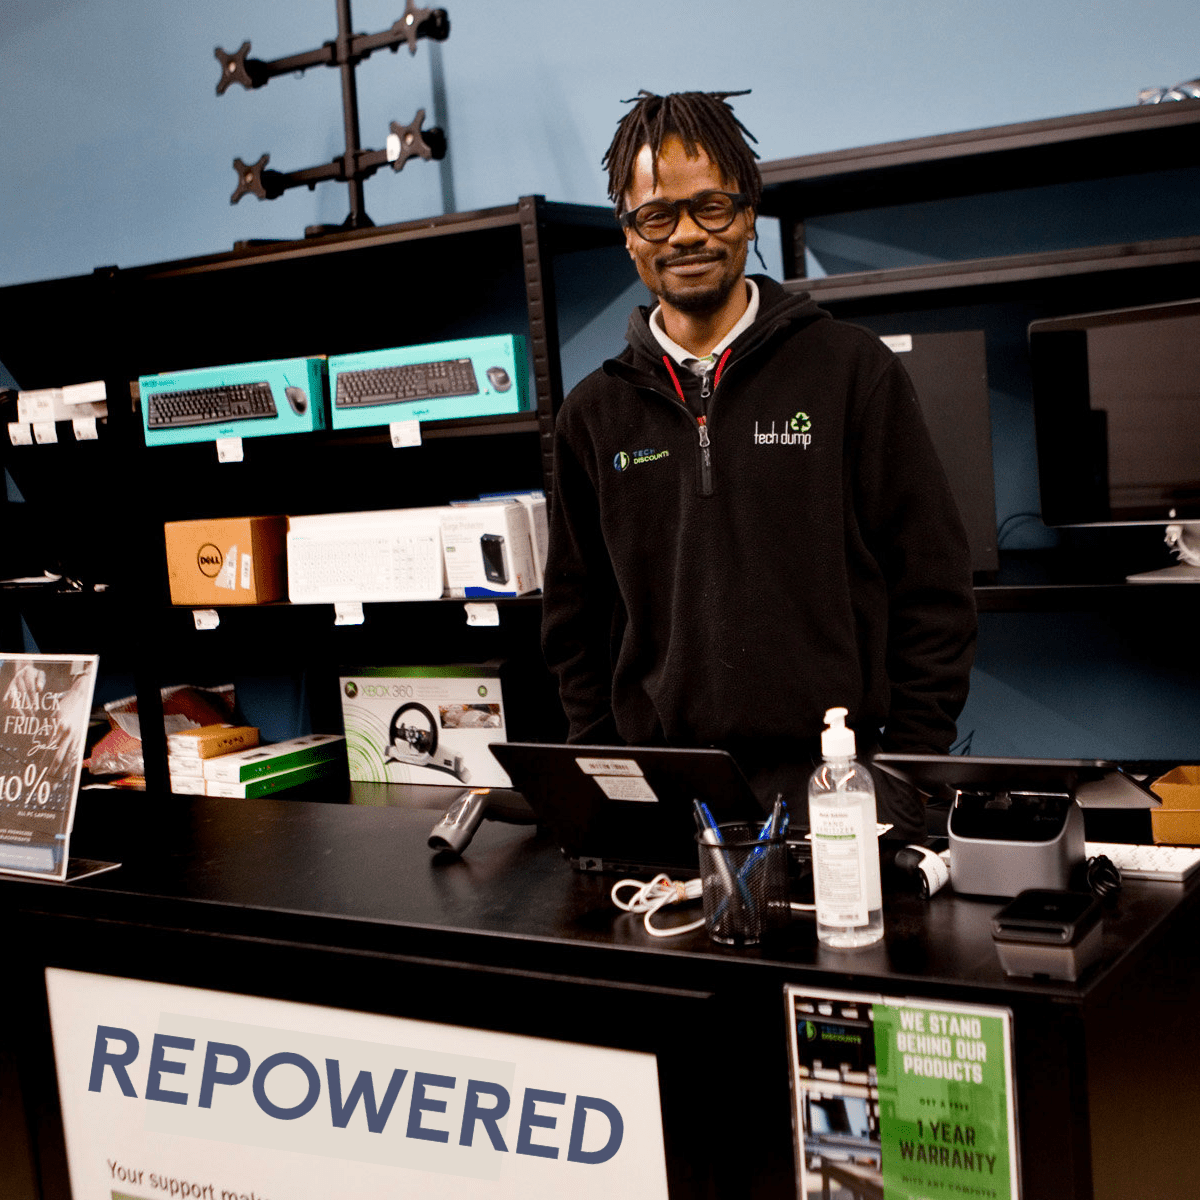 A Black man with braids smiles at the camera from behind a retail counter